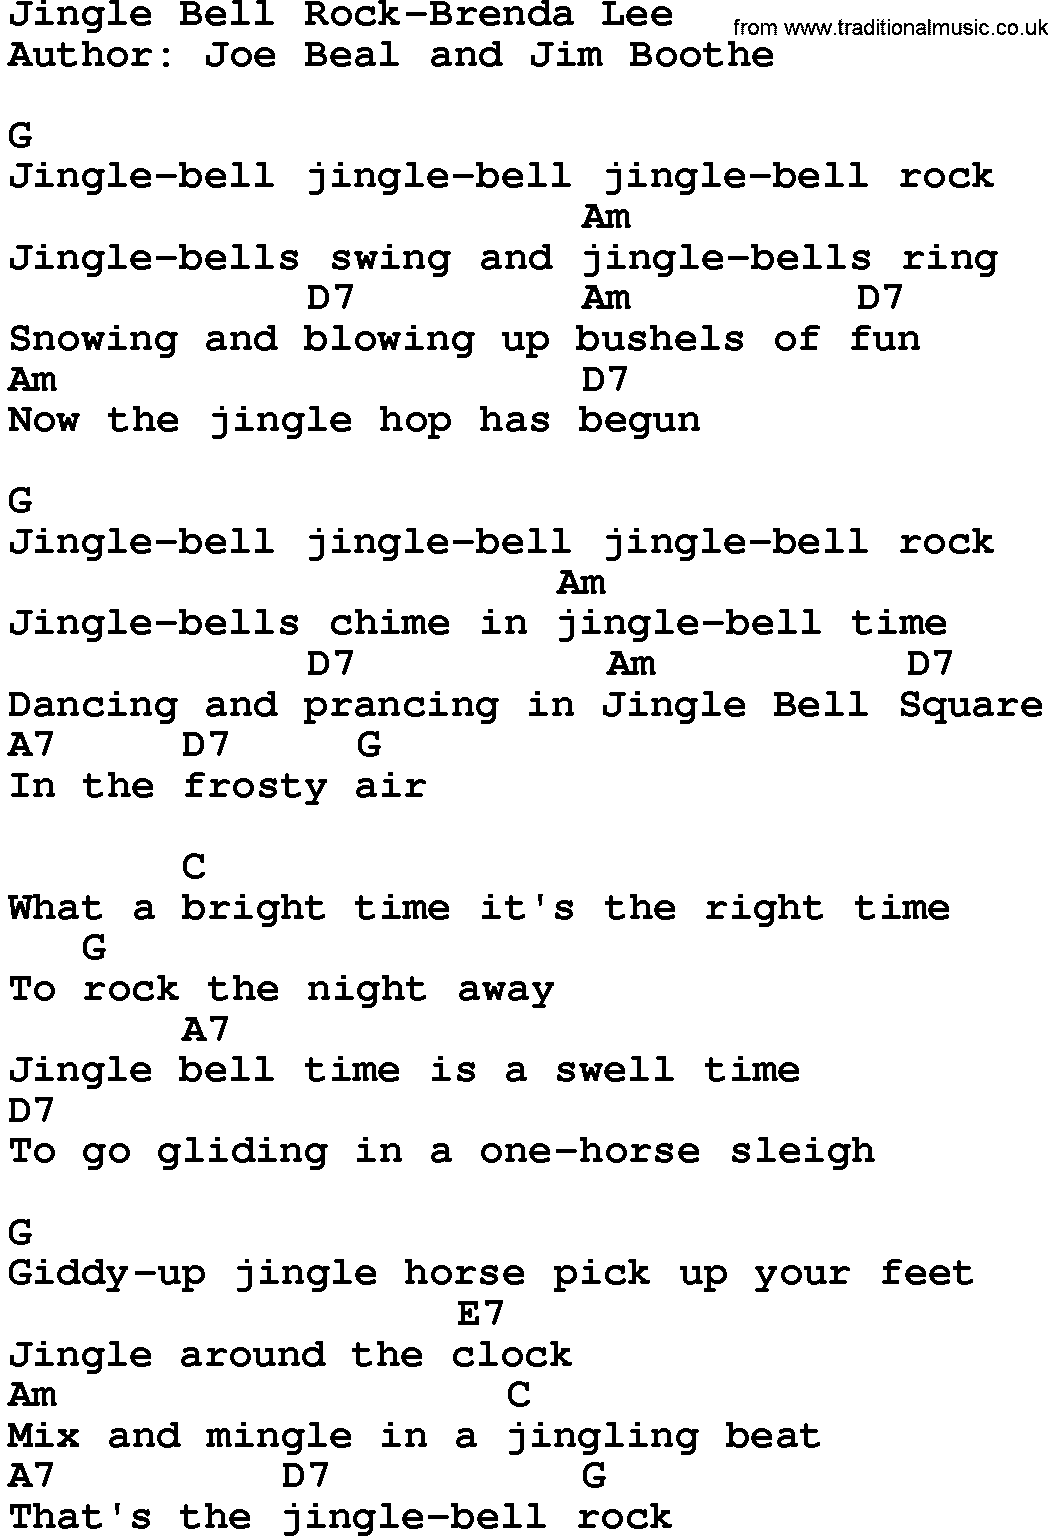 Country music song: Jingle Bell Rock-Brenda Lee lyrics and chords